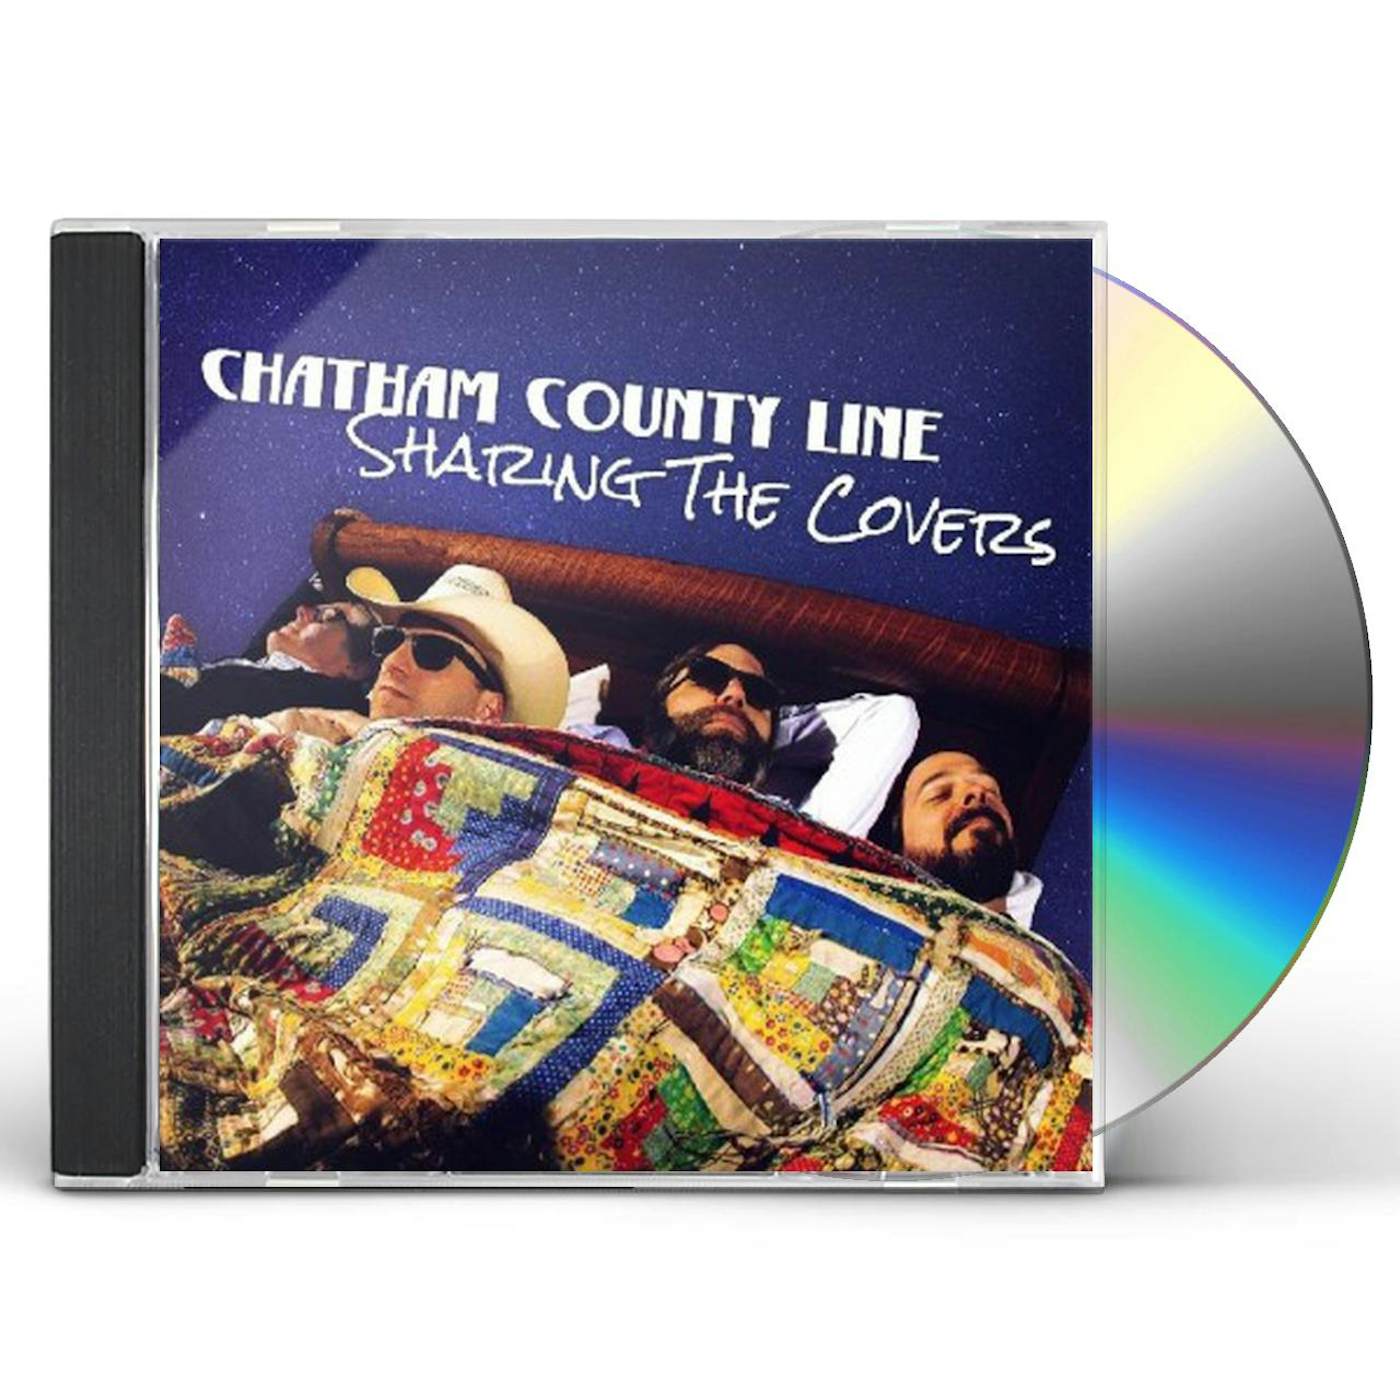 Chatham County Line SHARING THE COVERS CD